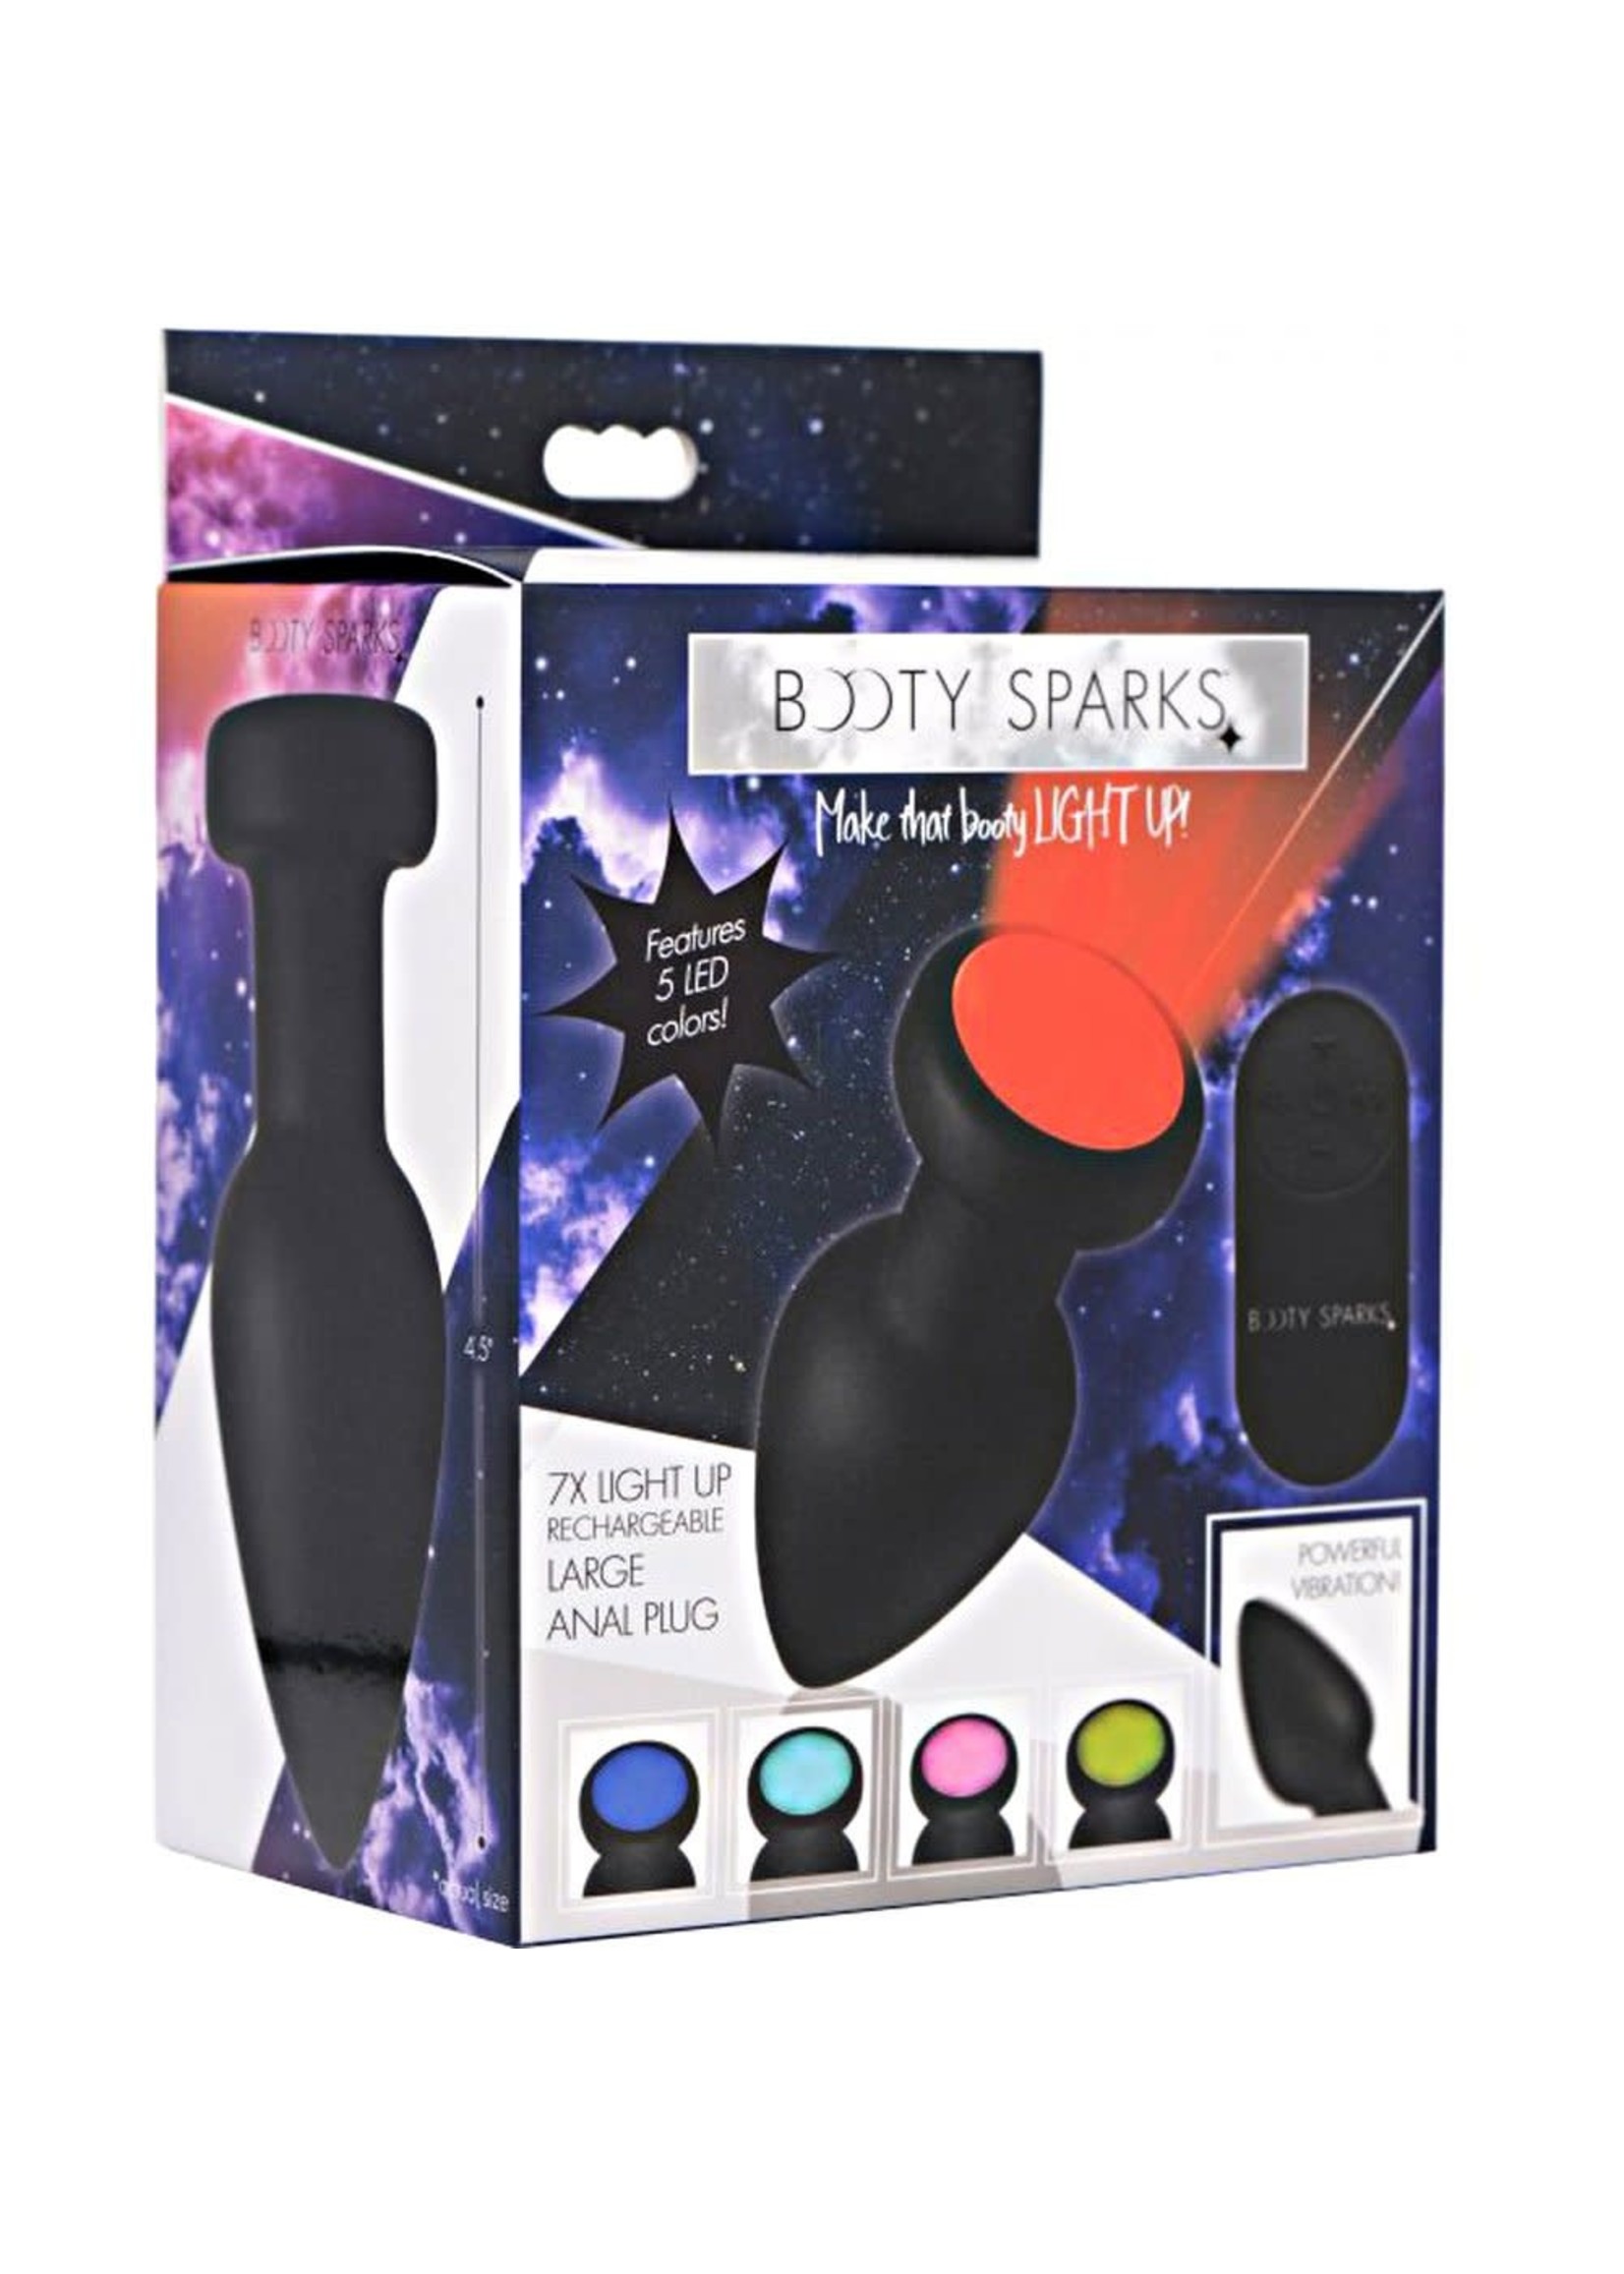 XR Brands Booty Sparks Silicone Vibrating LED Plug